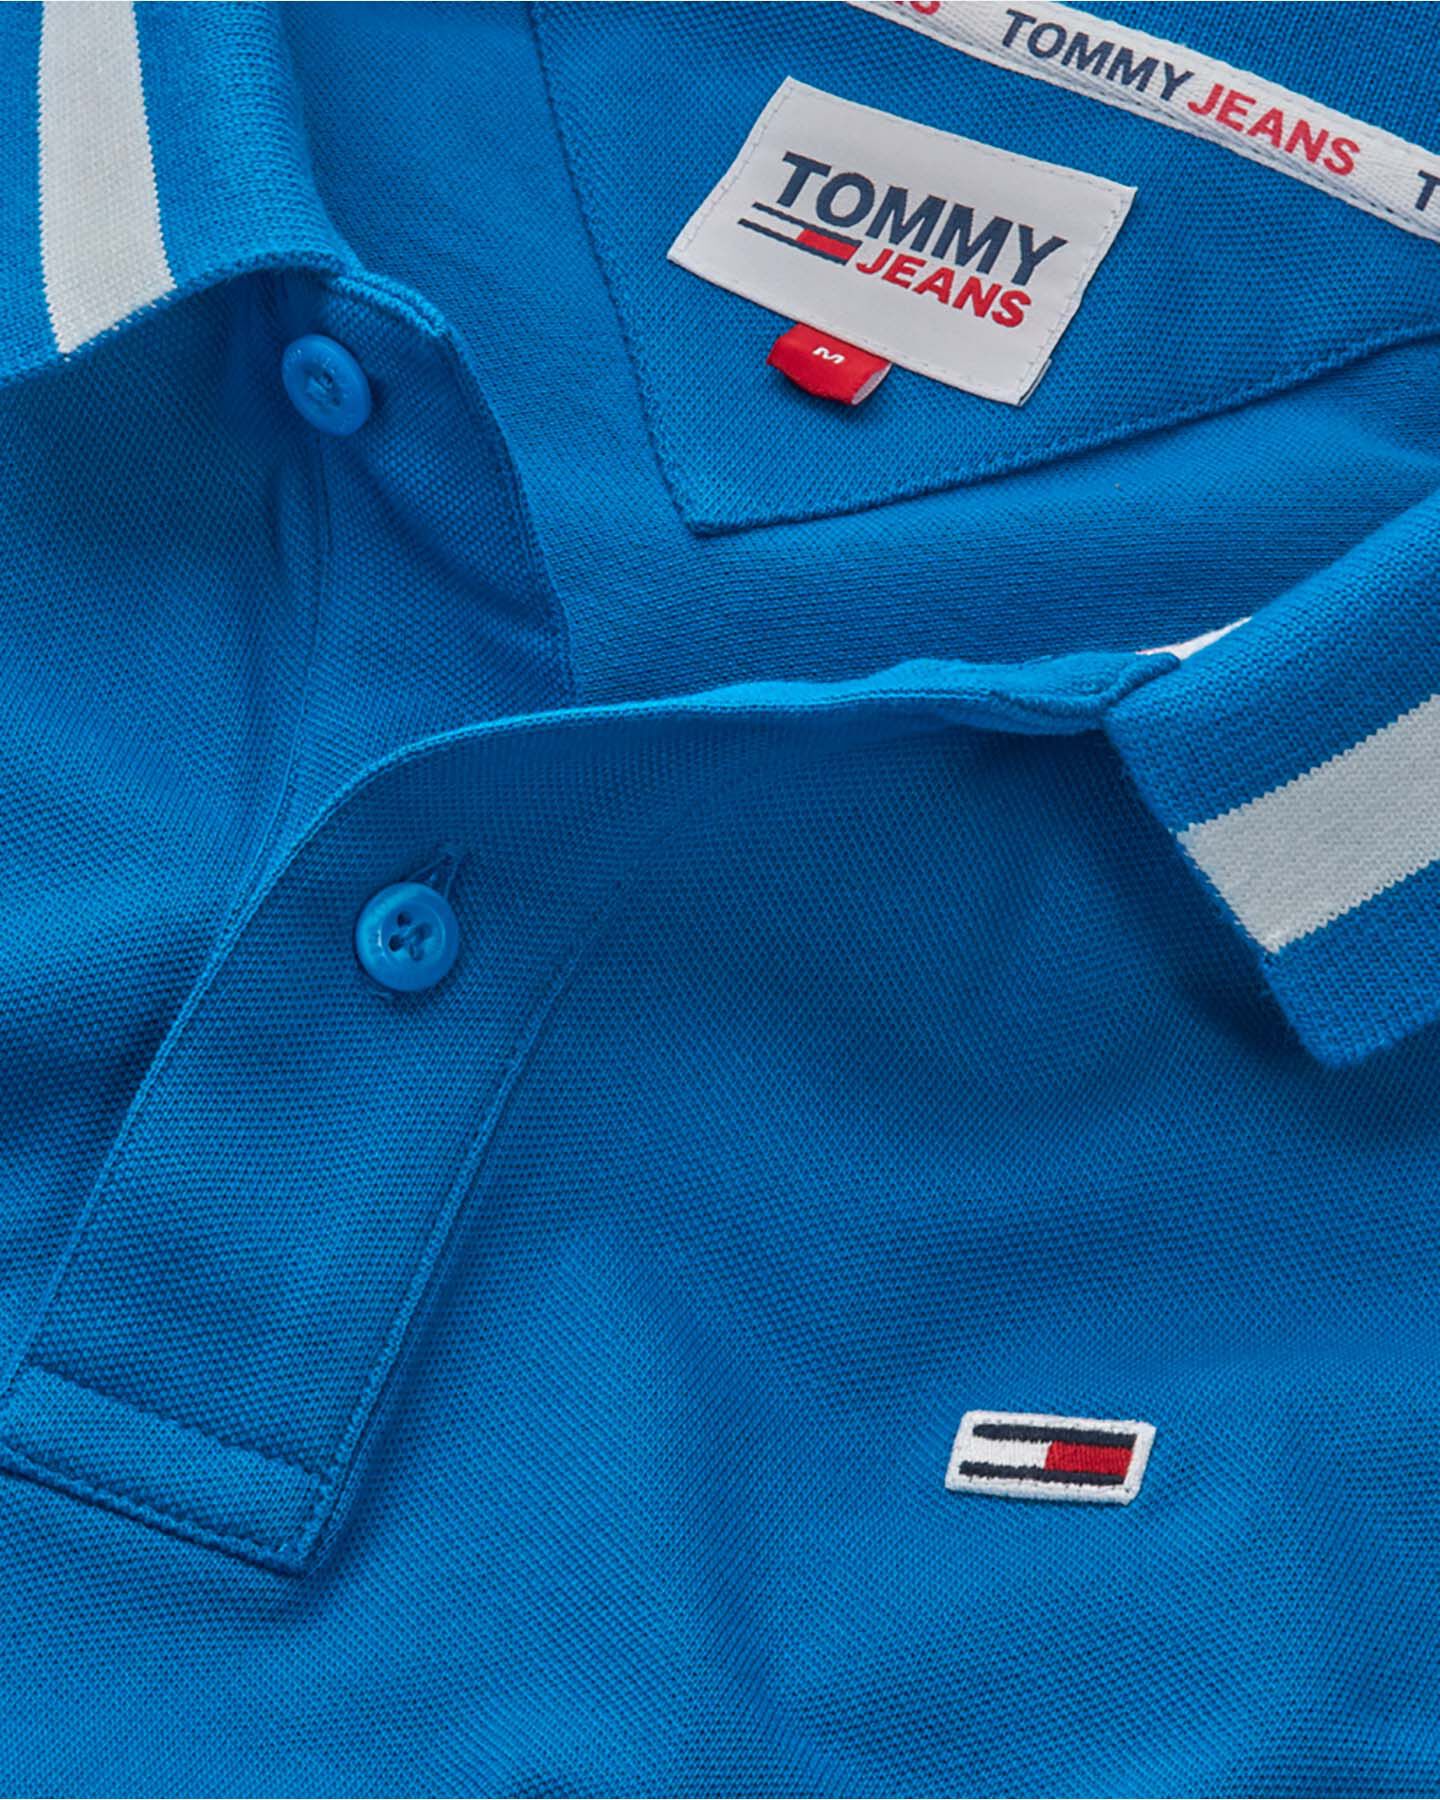  Polo TOMMY HILFIGER TIPPED STRETCH M S4105015|C22|S scatto 4